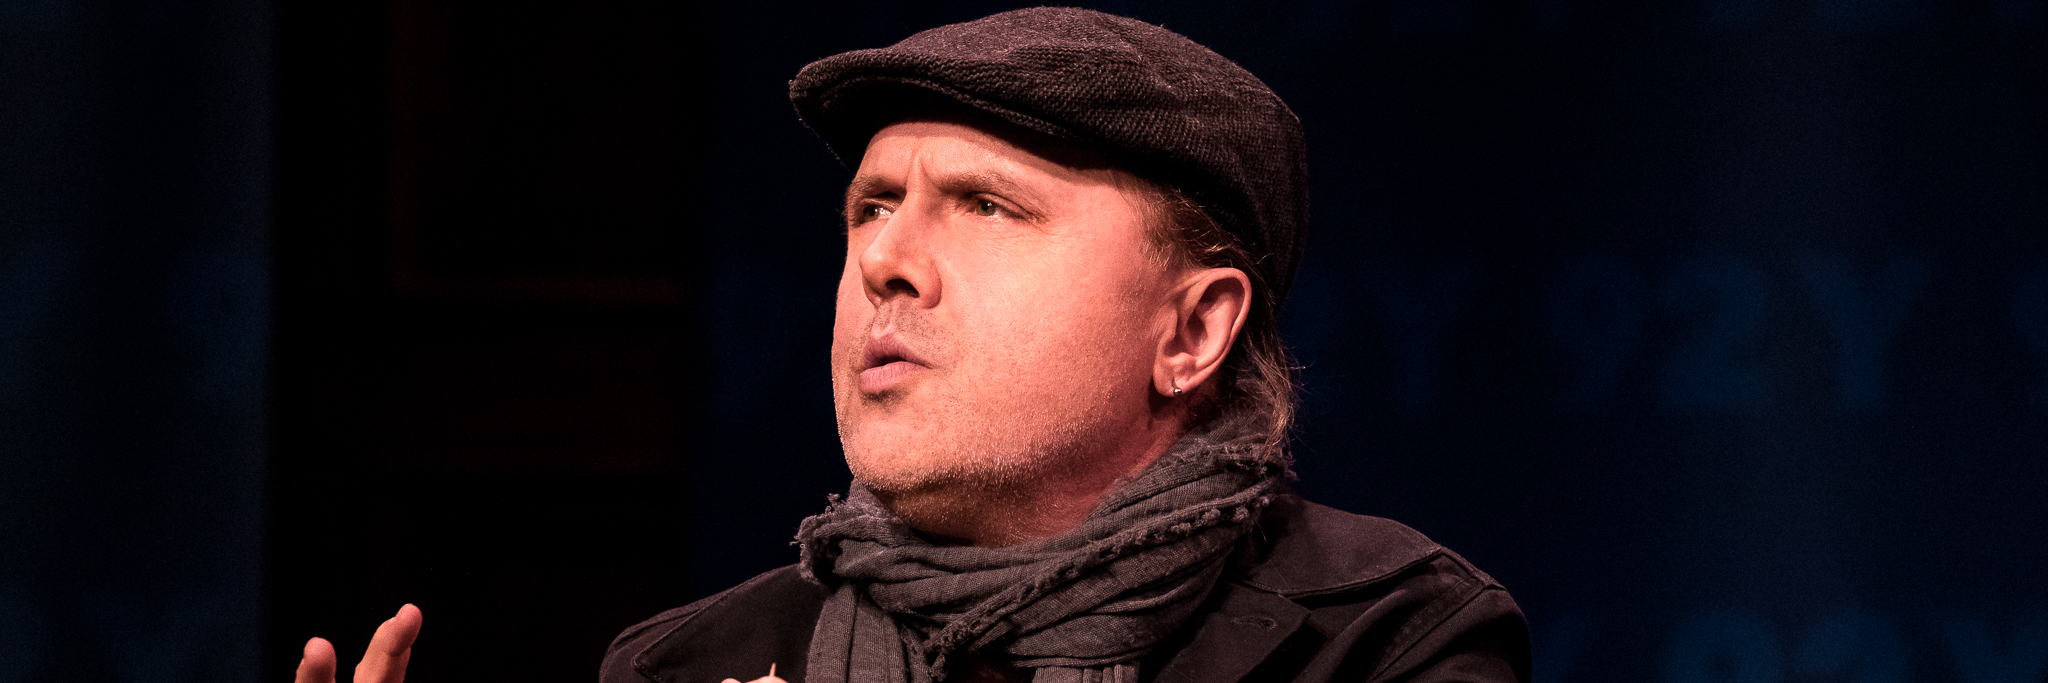 Metallica’s Lars Ulrich Discusses Life, Legacy At 92Y In New York